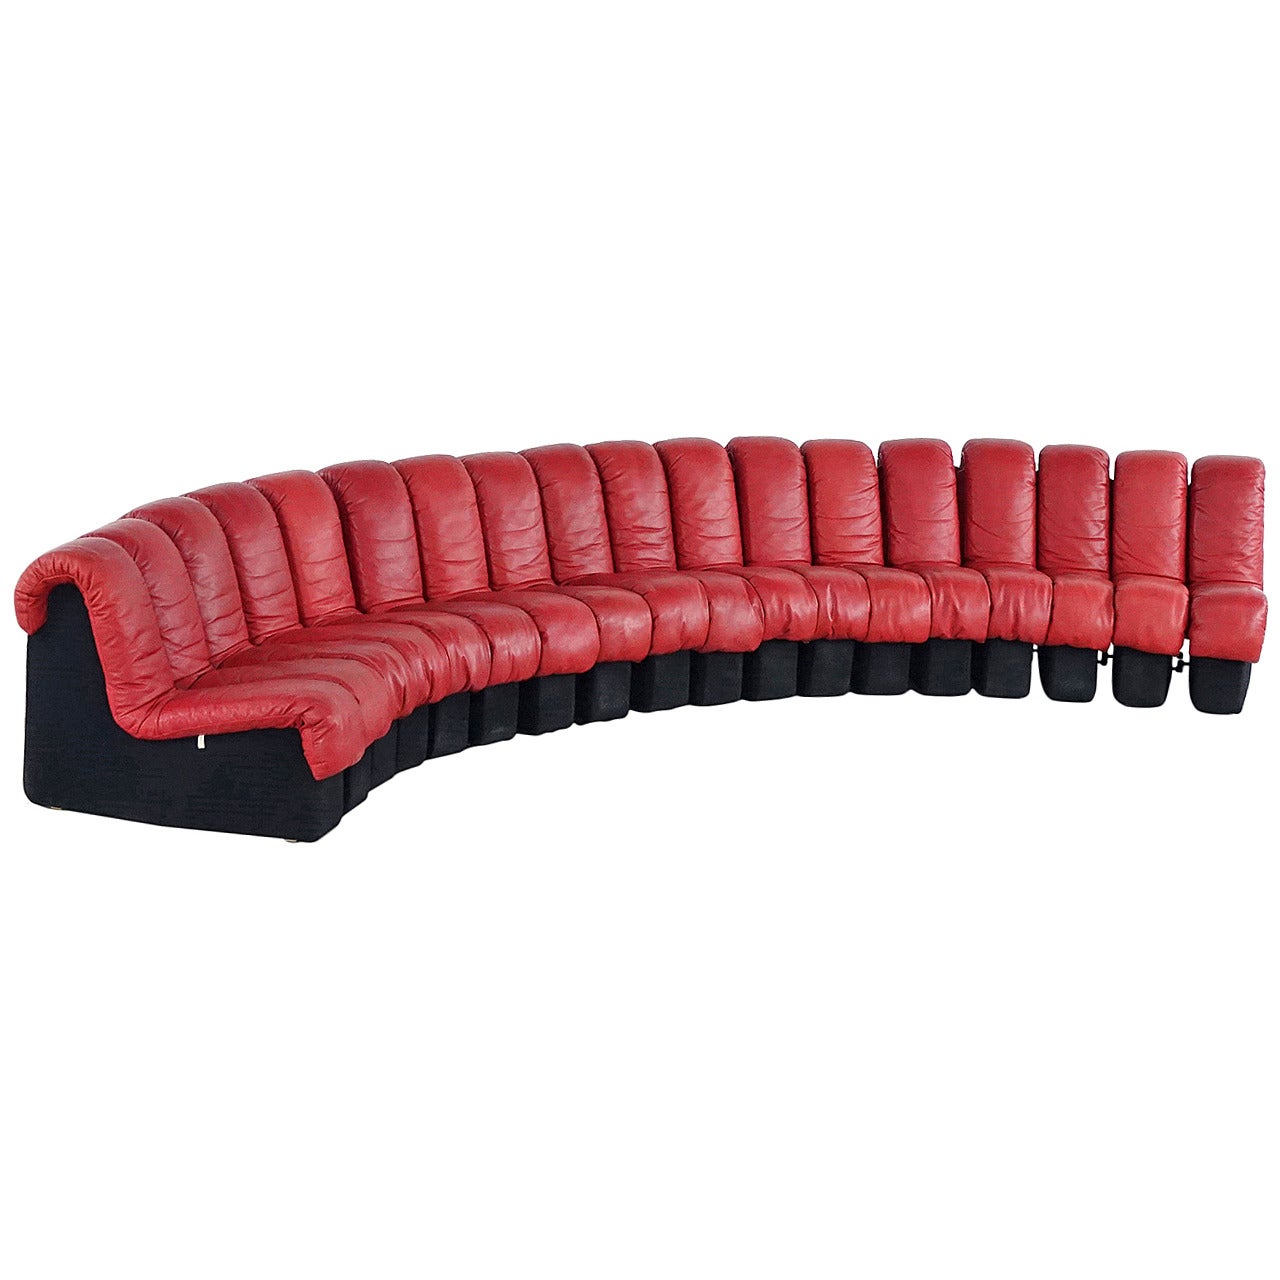 De Sede DS 600 Sofa by Ueli Berger and Riva, 1972, Red Leather